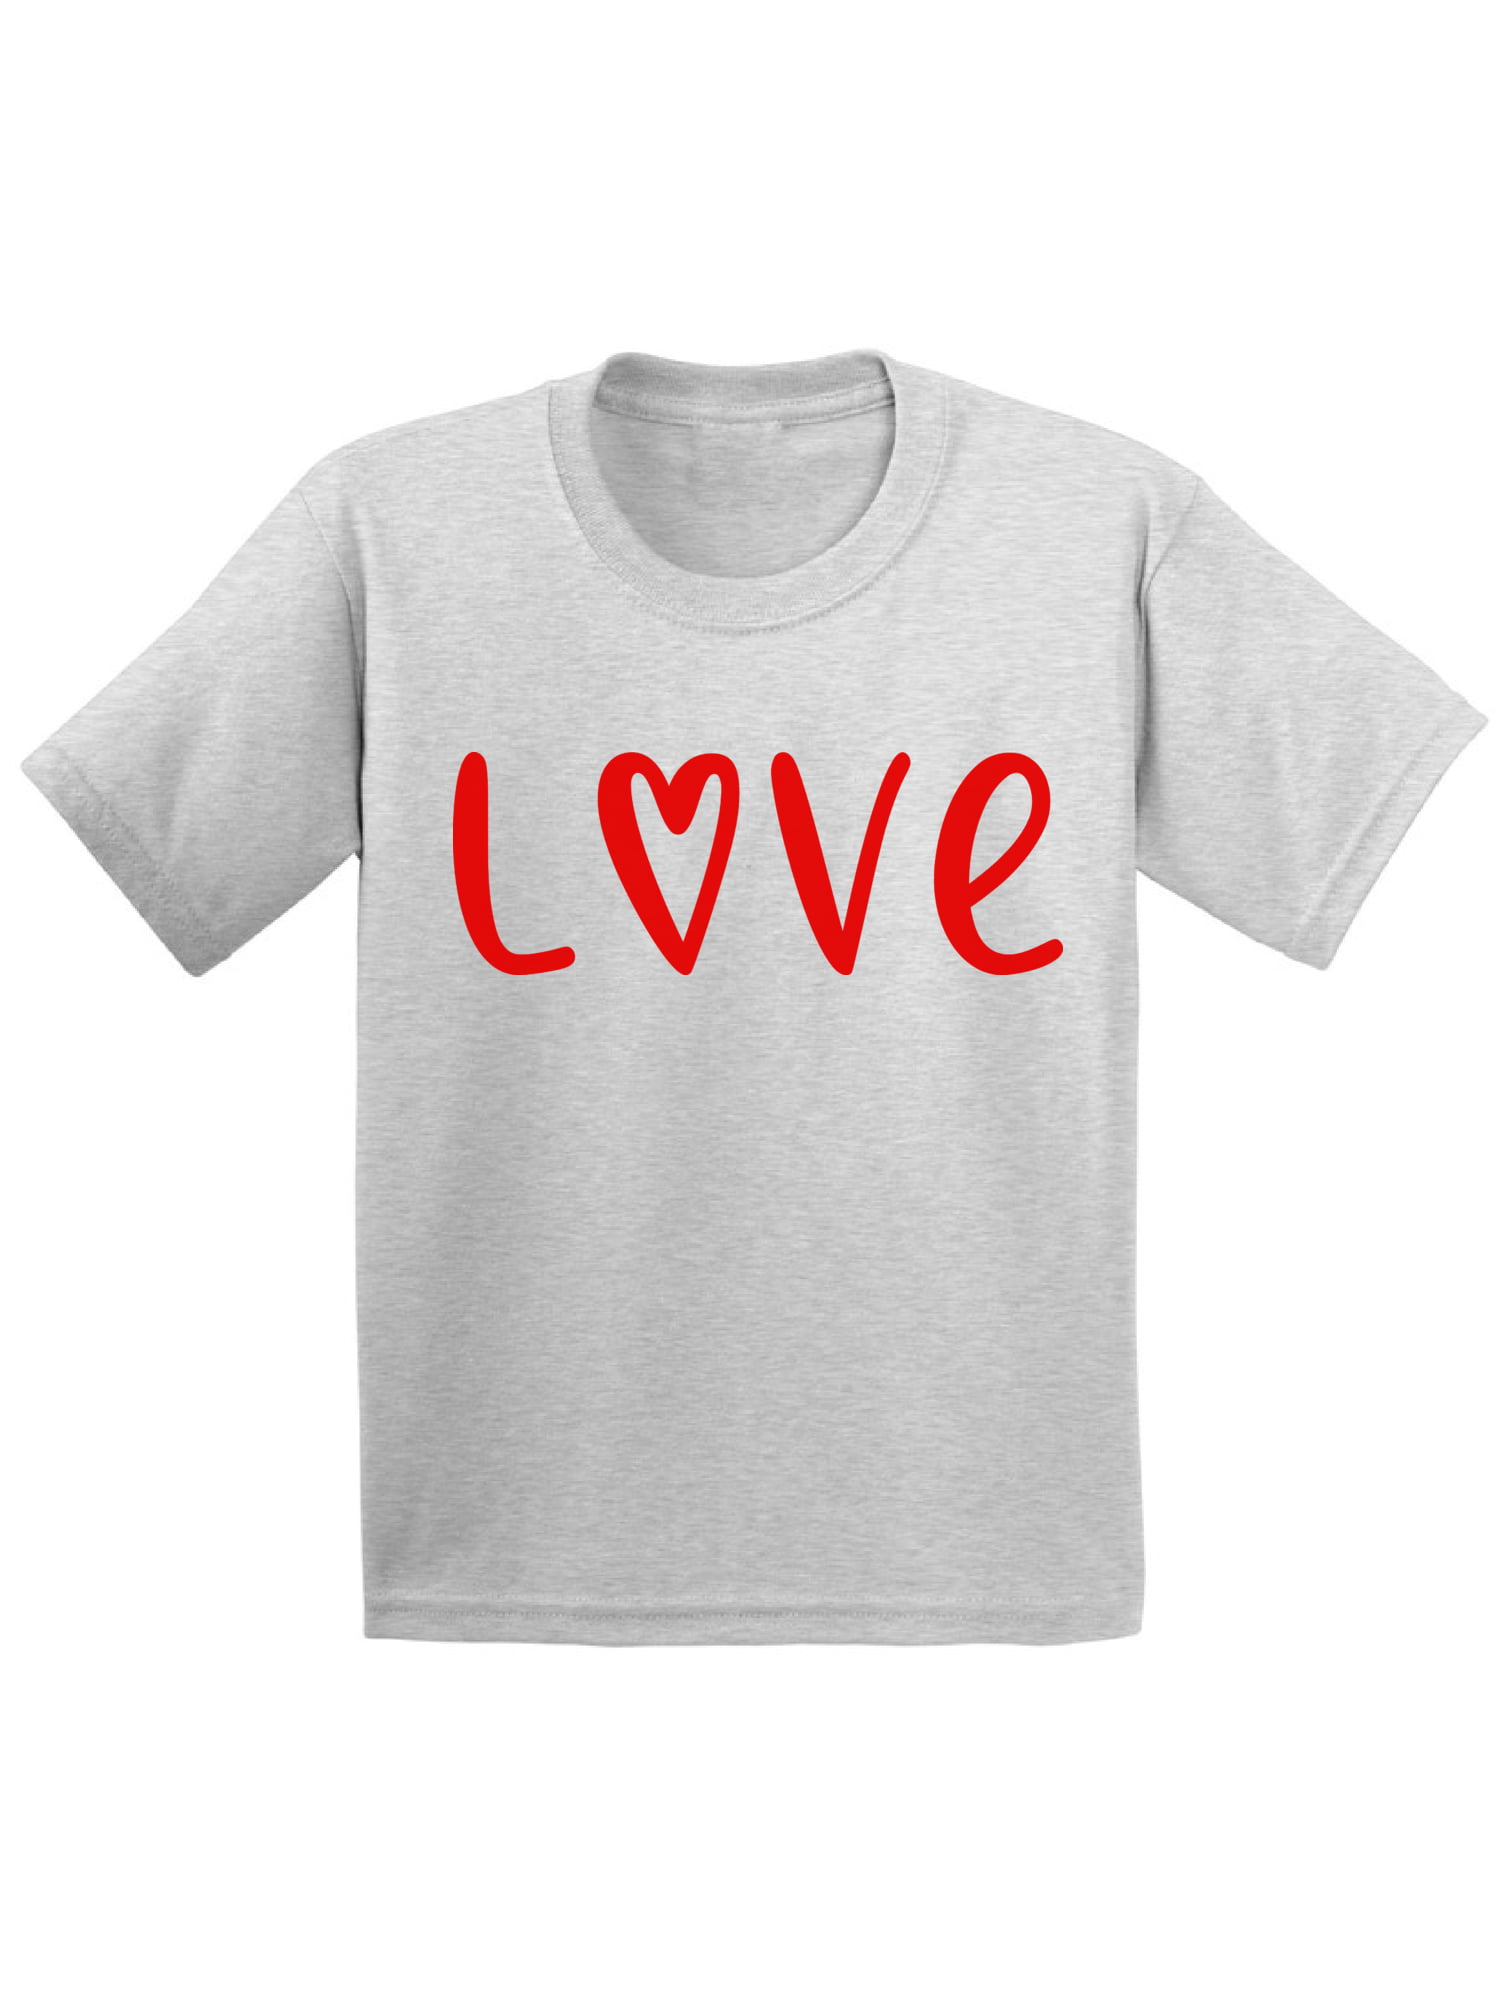 Valentines Day Raglan for Kids Toddler Boys Clothes 3t-4t 5 Year Old Girls Outfits Cute Love 6T Valentine's Unisex Tee